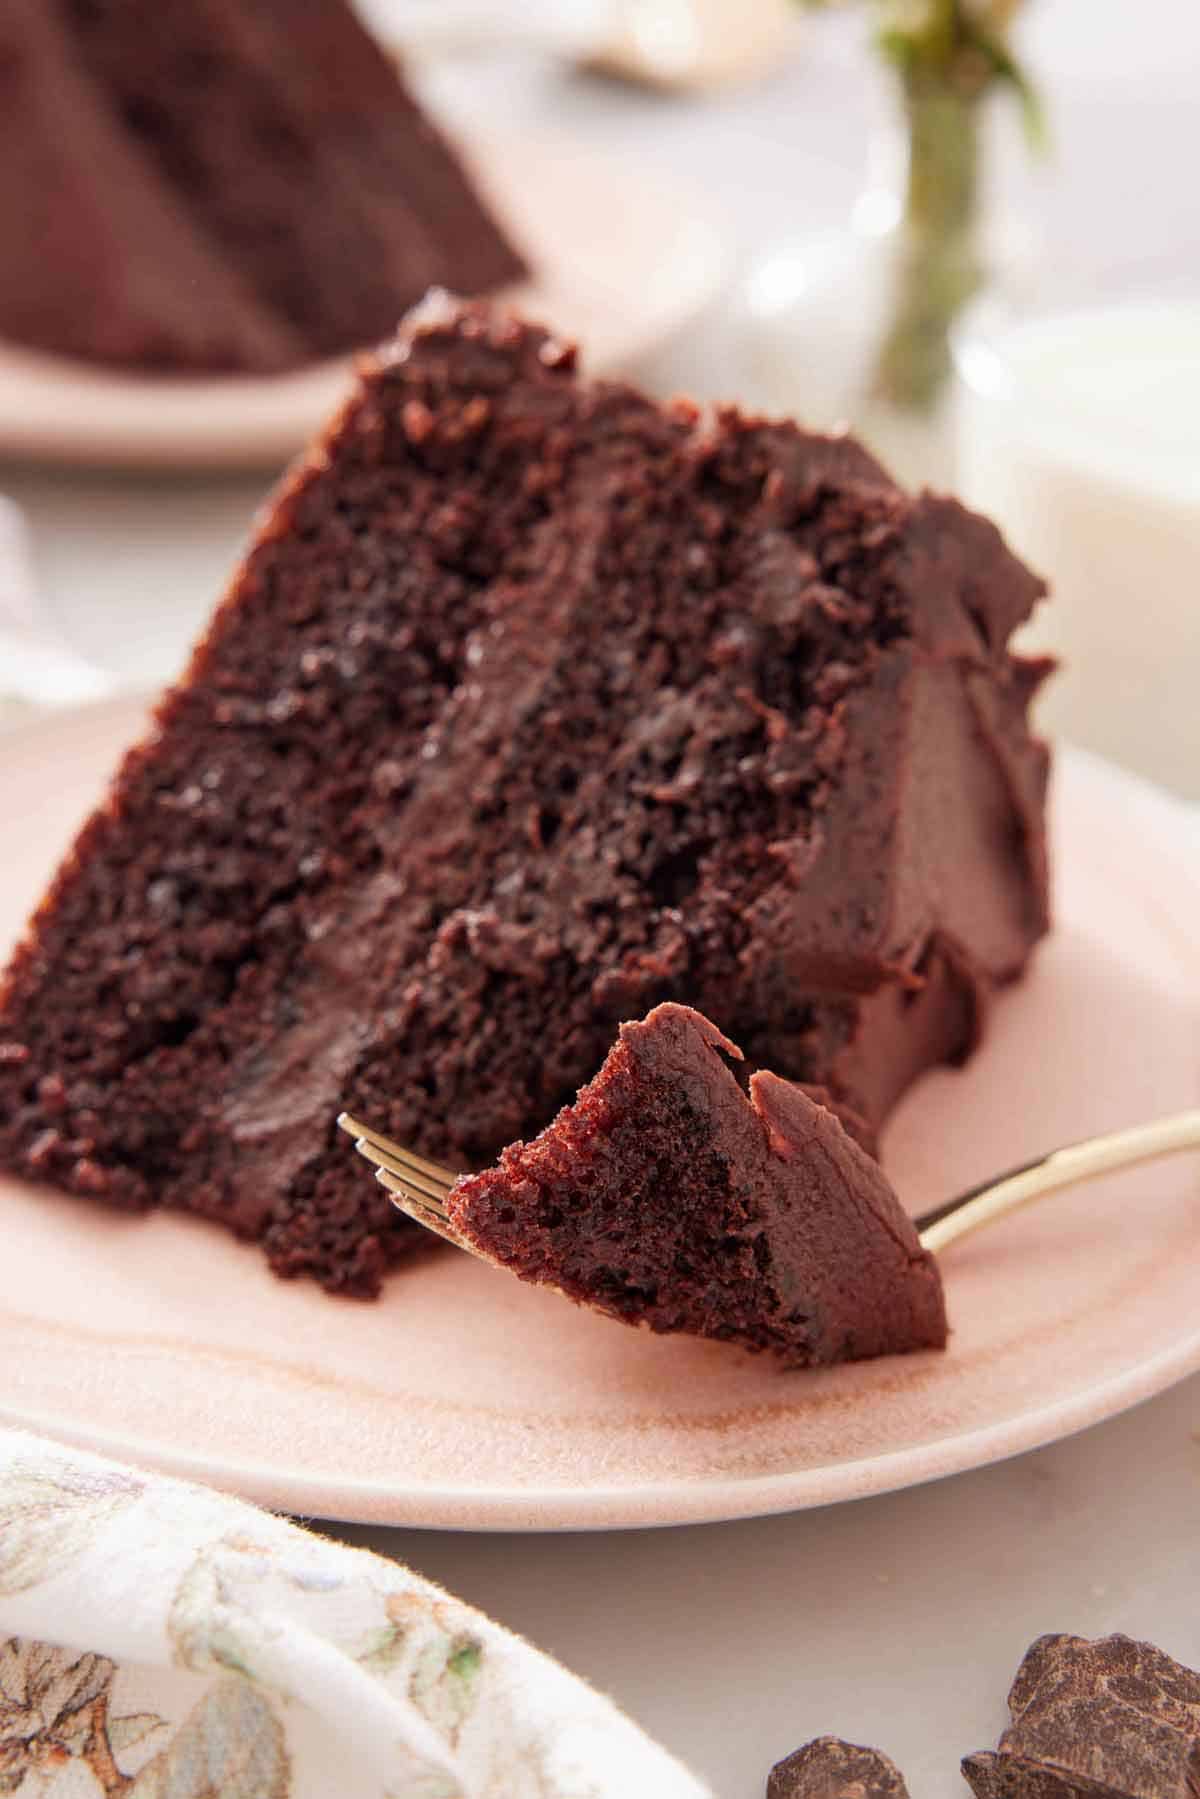 A slice of chocolate cake on a plate with a forkful in front.